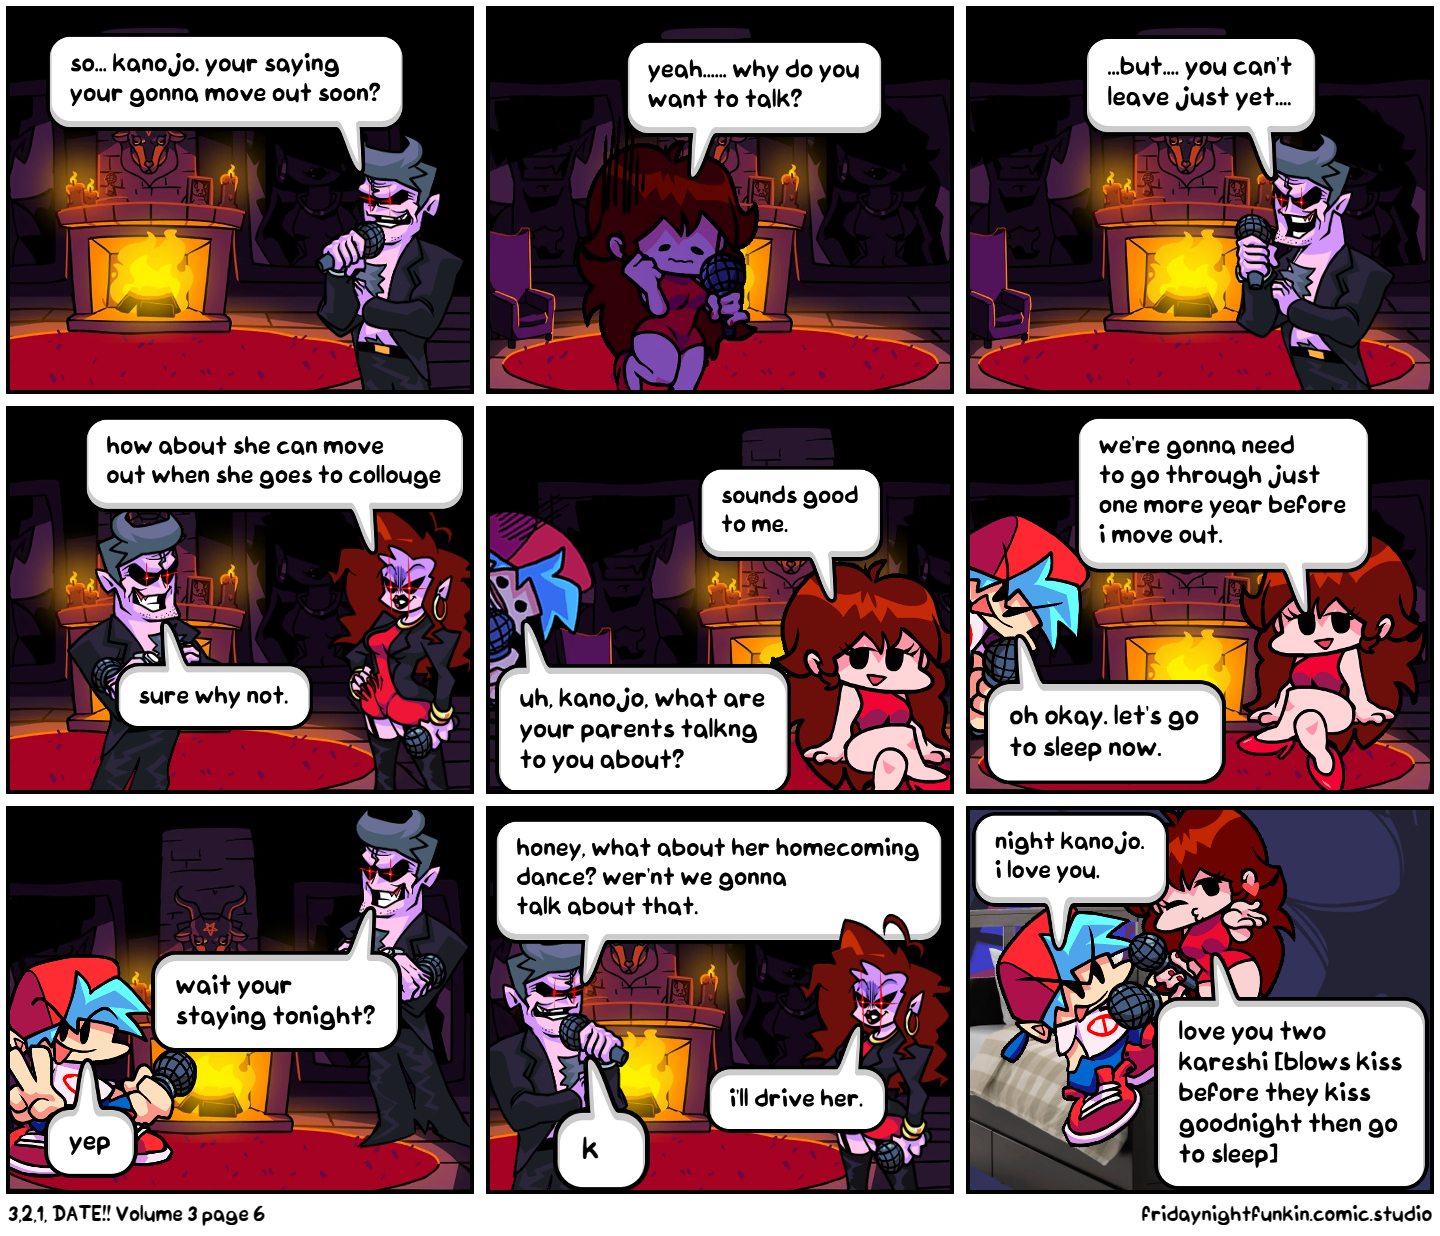 3,2,1, DATE!! Volume 3 page 6